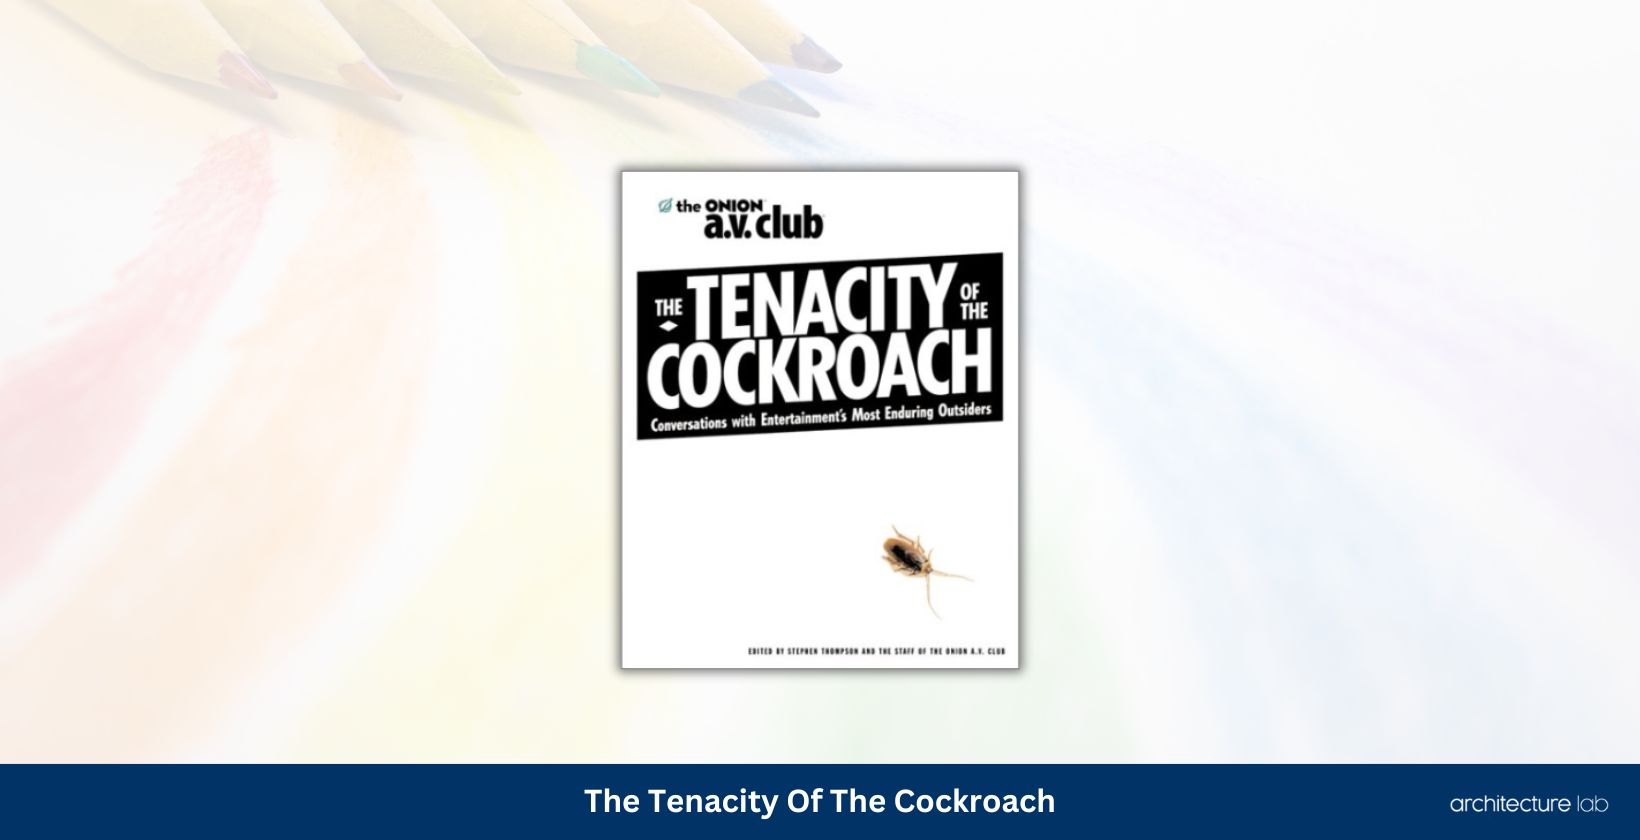 The tenacity of the cockroach